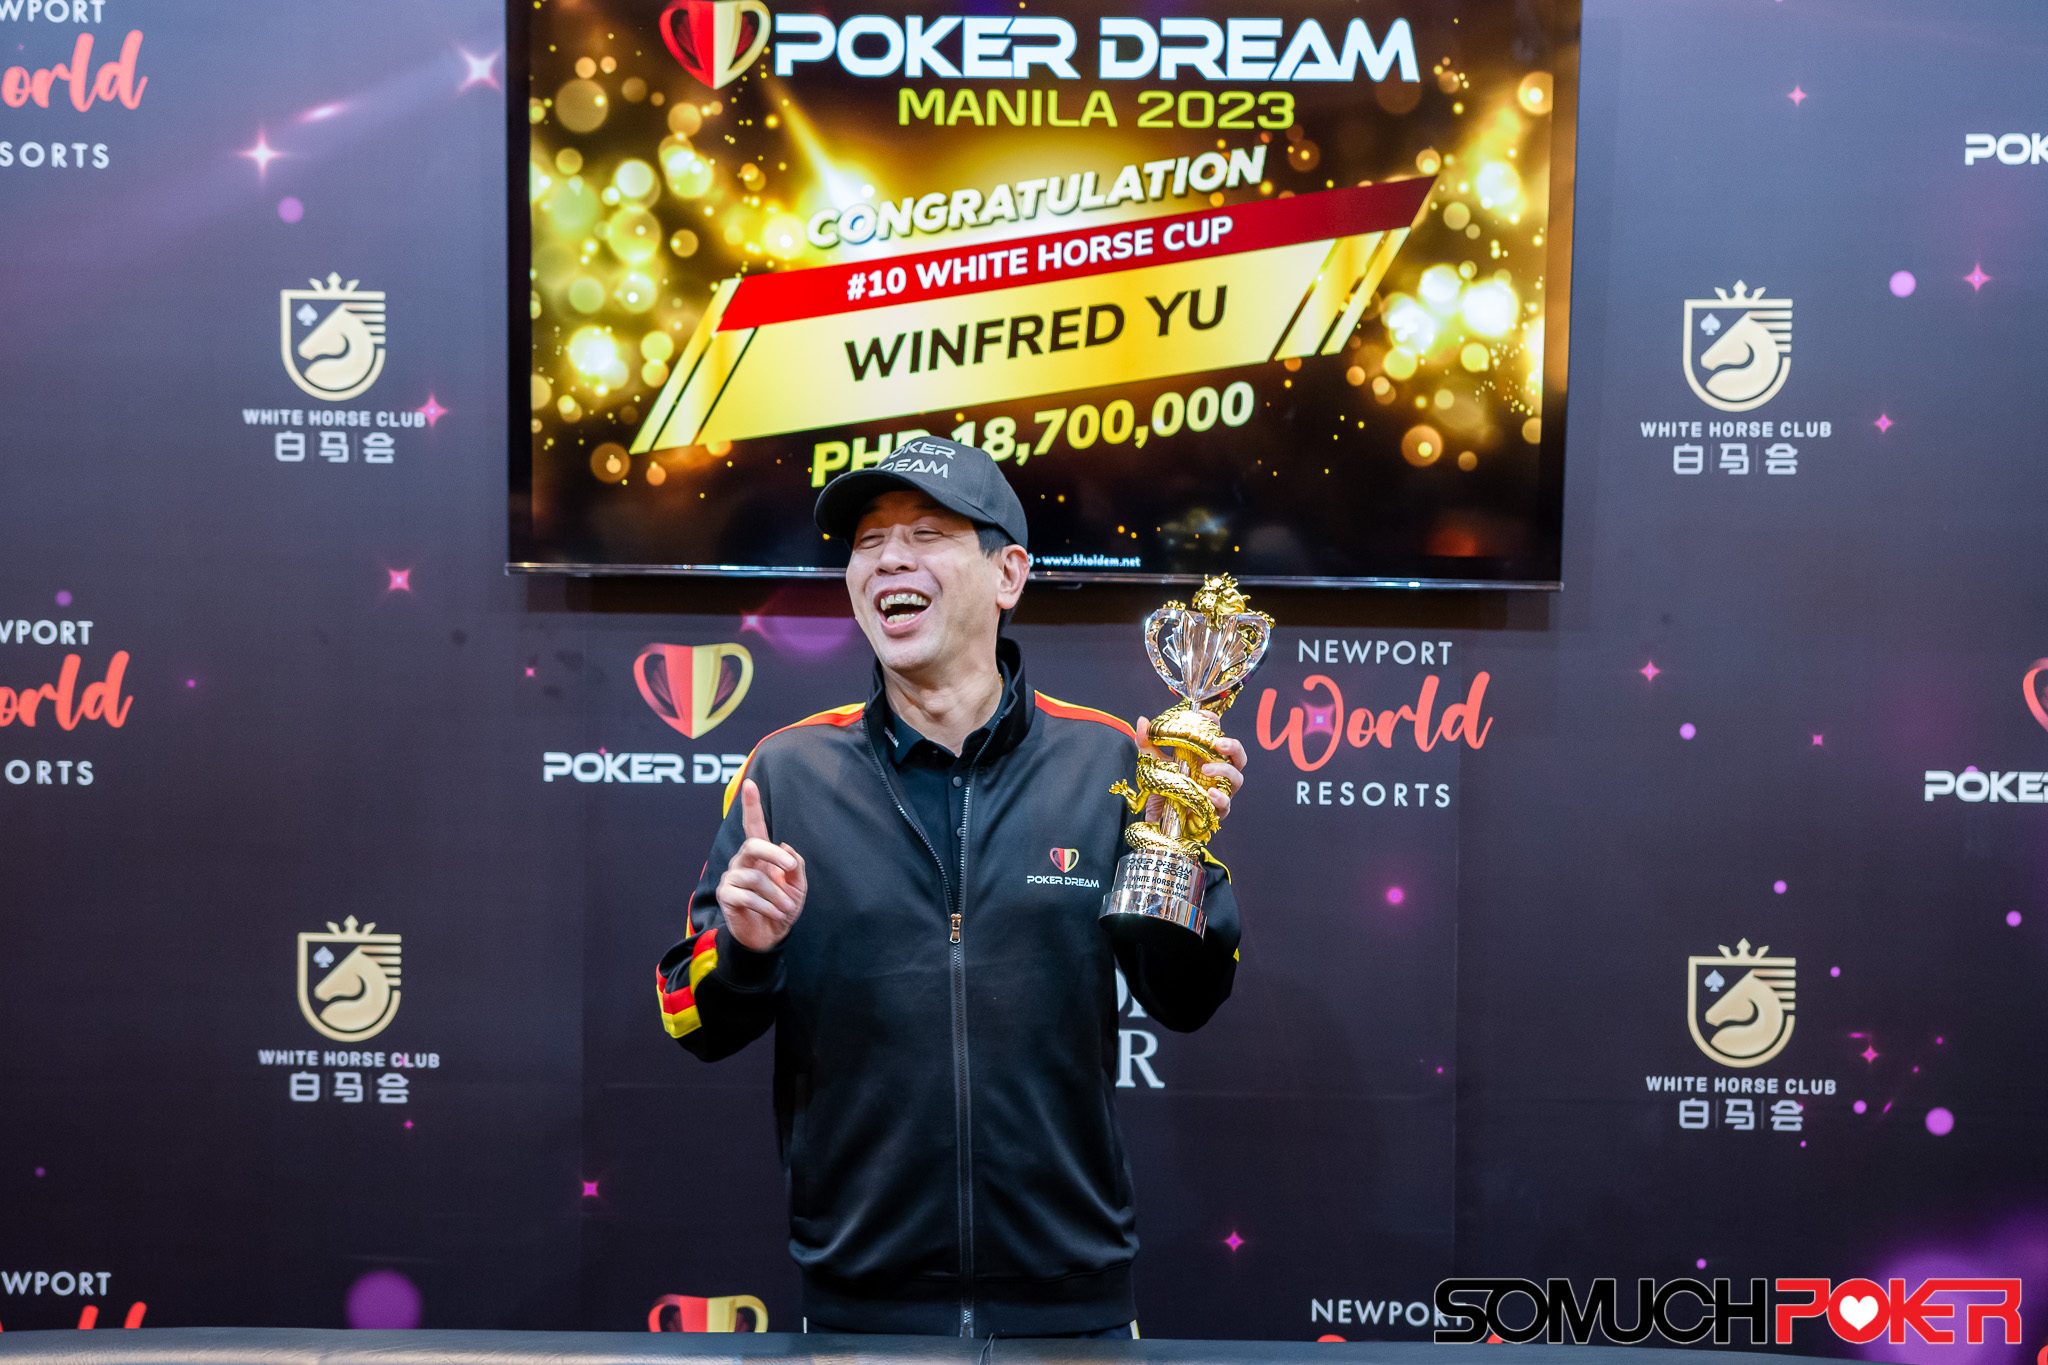 Poker Dream Manila: Winfred Yu overcomes a deficit at heads up to win the White Horse Cup Short Deck Super High Roller